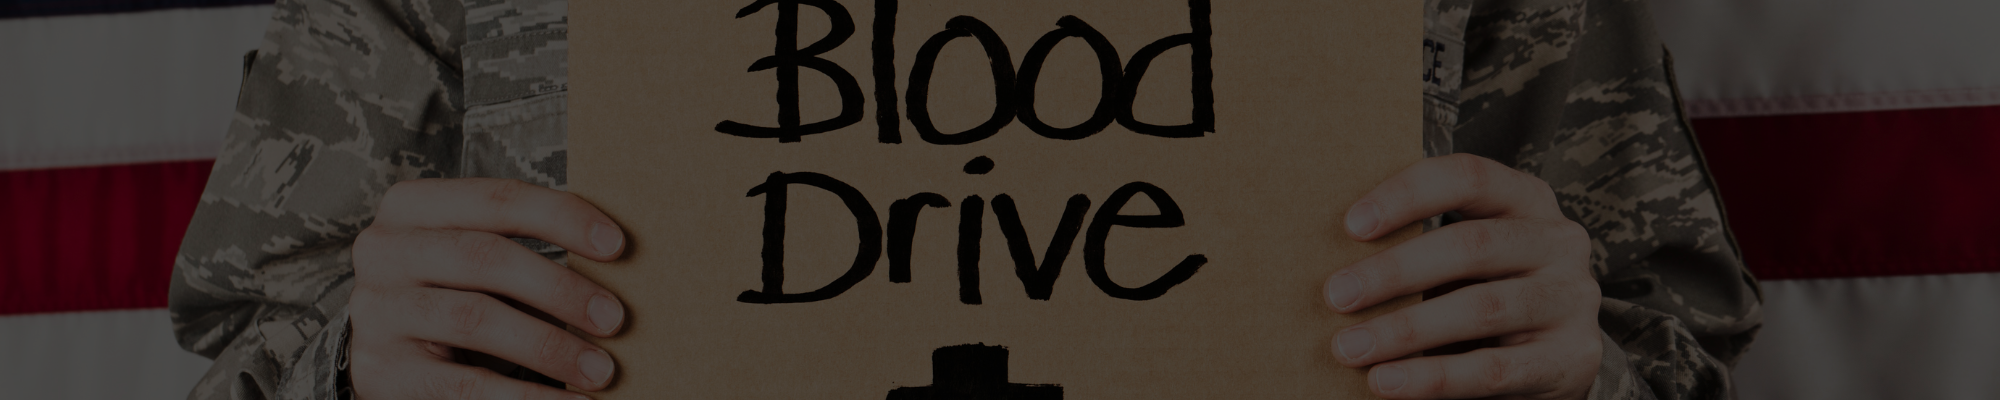 Image of man holding a sign that says "blood drive"